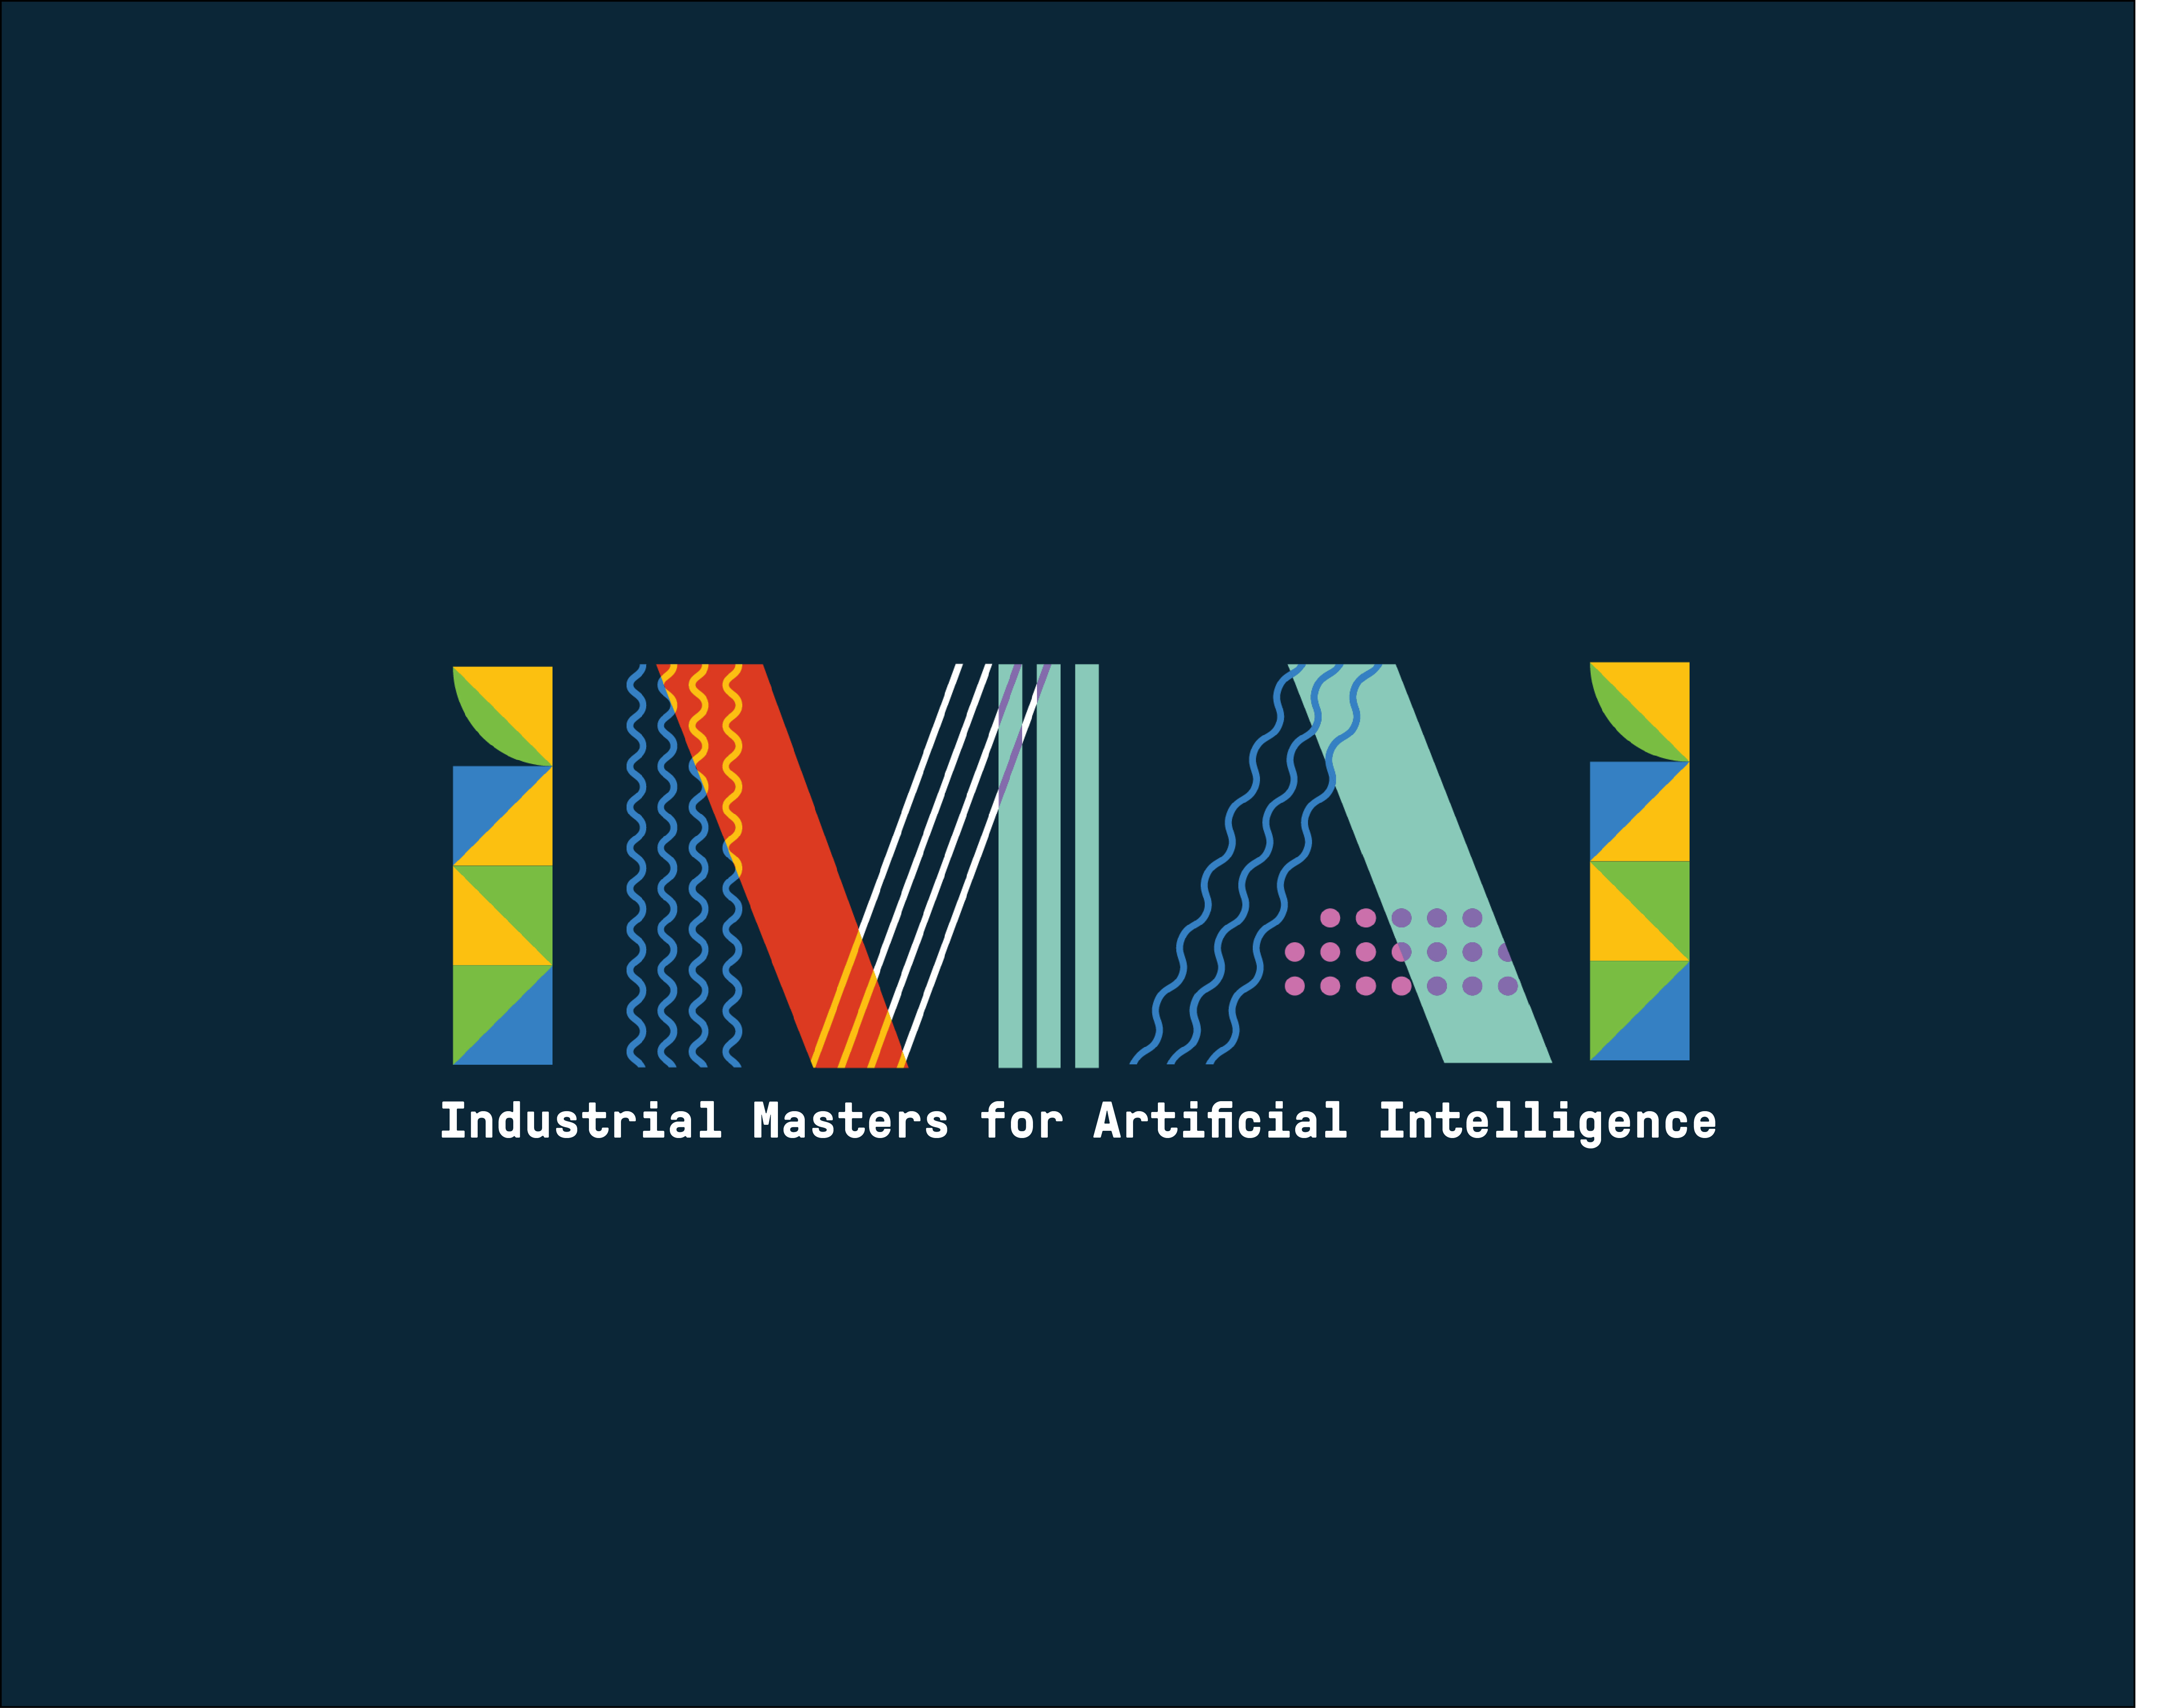 Industrial Masters in AI